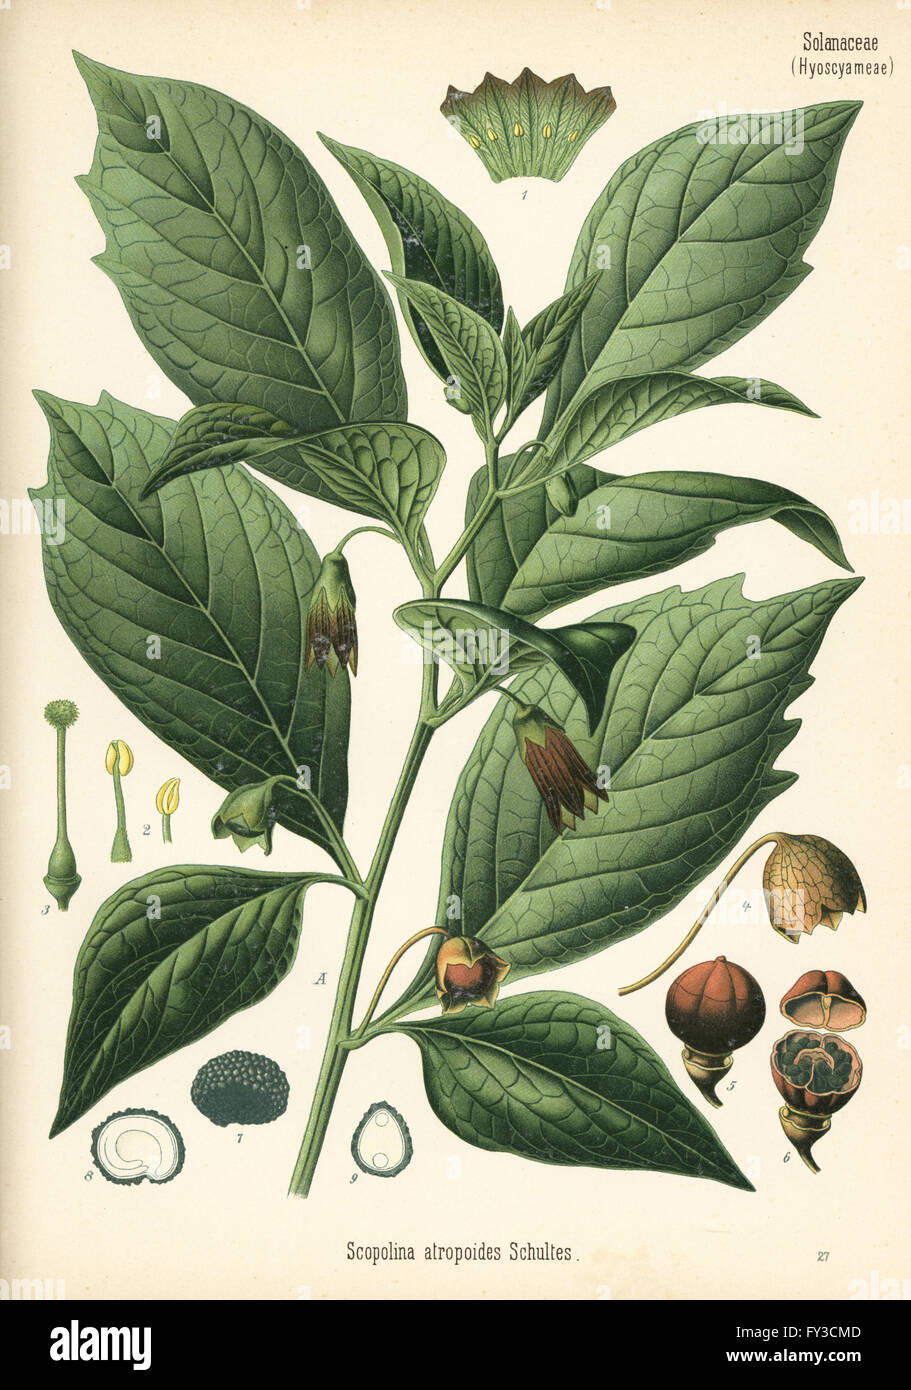 Henbane bell, Scopolia carniolica (Scopolina atropoides). Chromolithograph after a botanical illustration from Hermann Adolph Koehler's Medicinal Plants, edited by Gustav Pabst, Koehler, Germany, 1887. Stock Photo